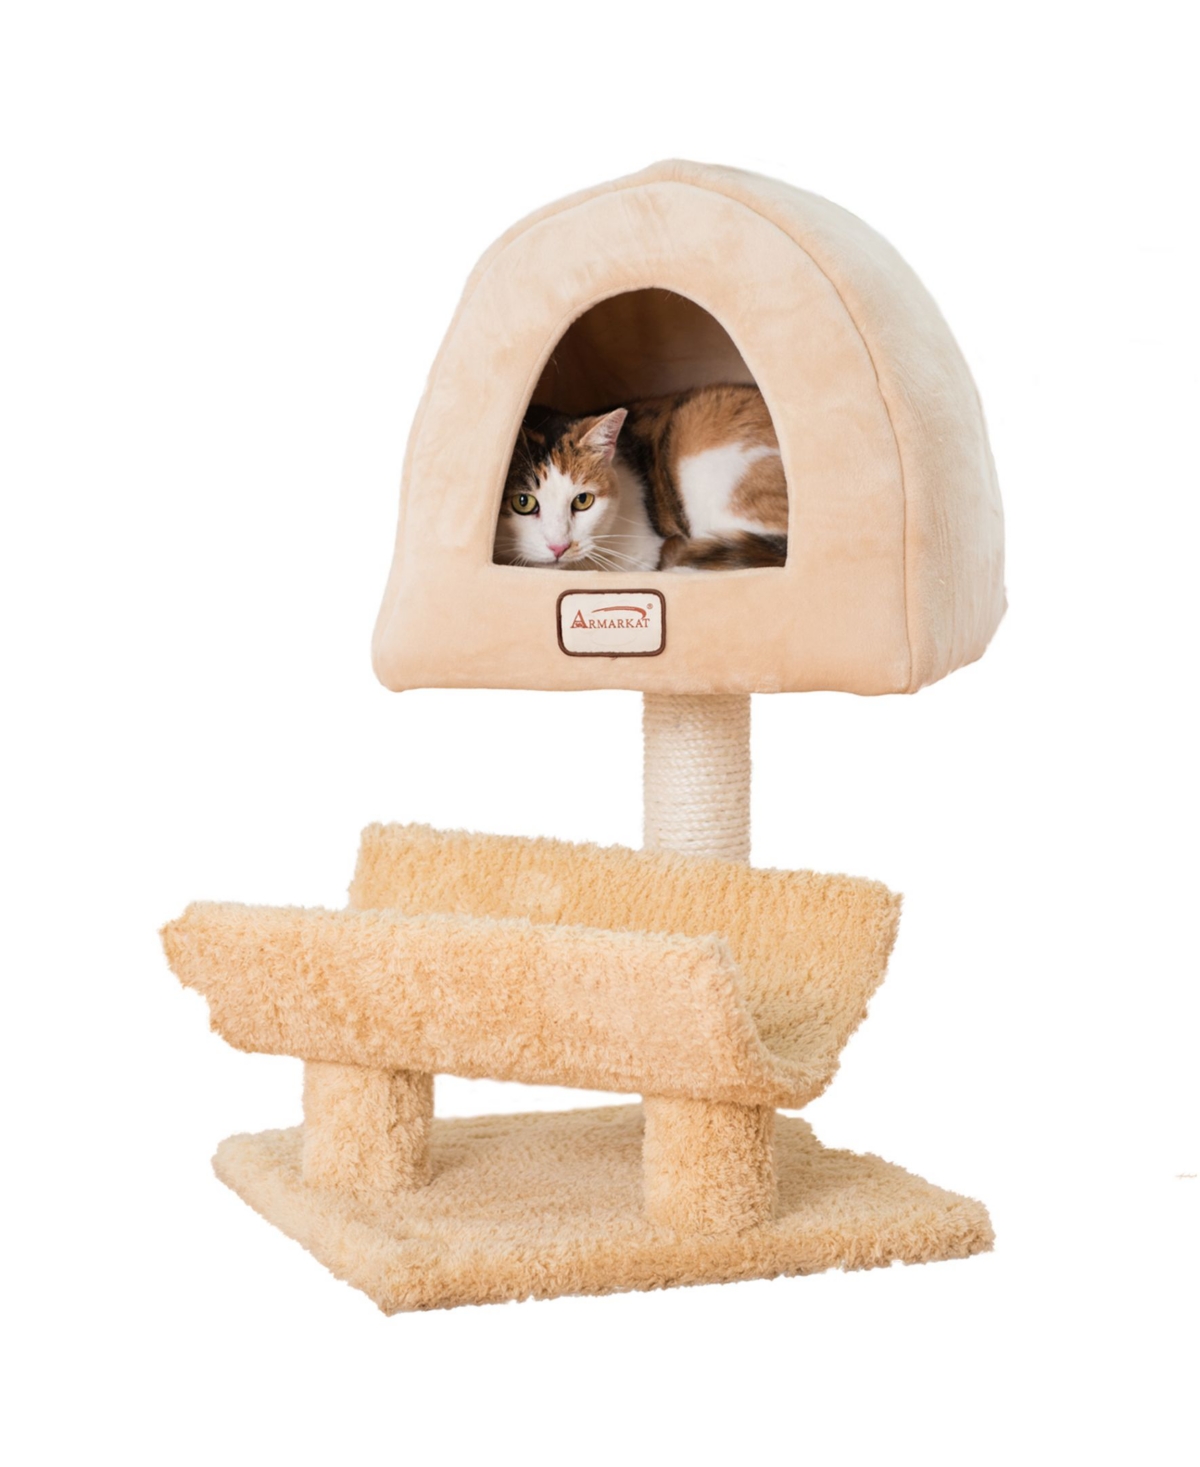 Real Wood Cat Condo, Cat Scratching Post With Plush Condo - Goldenrod